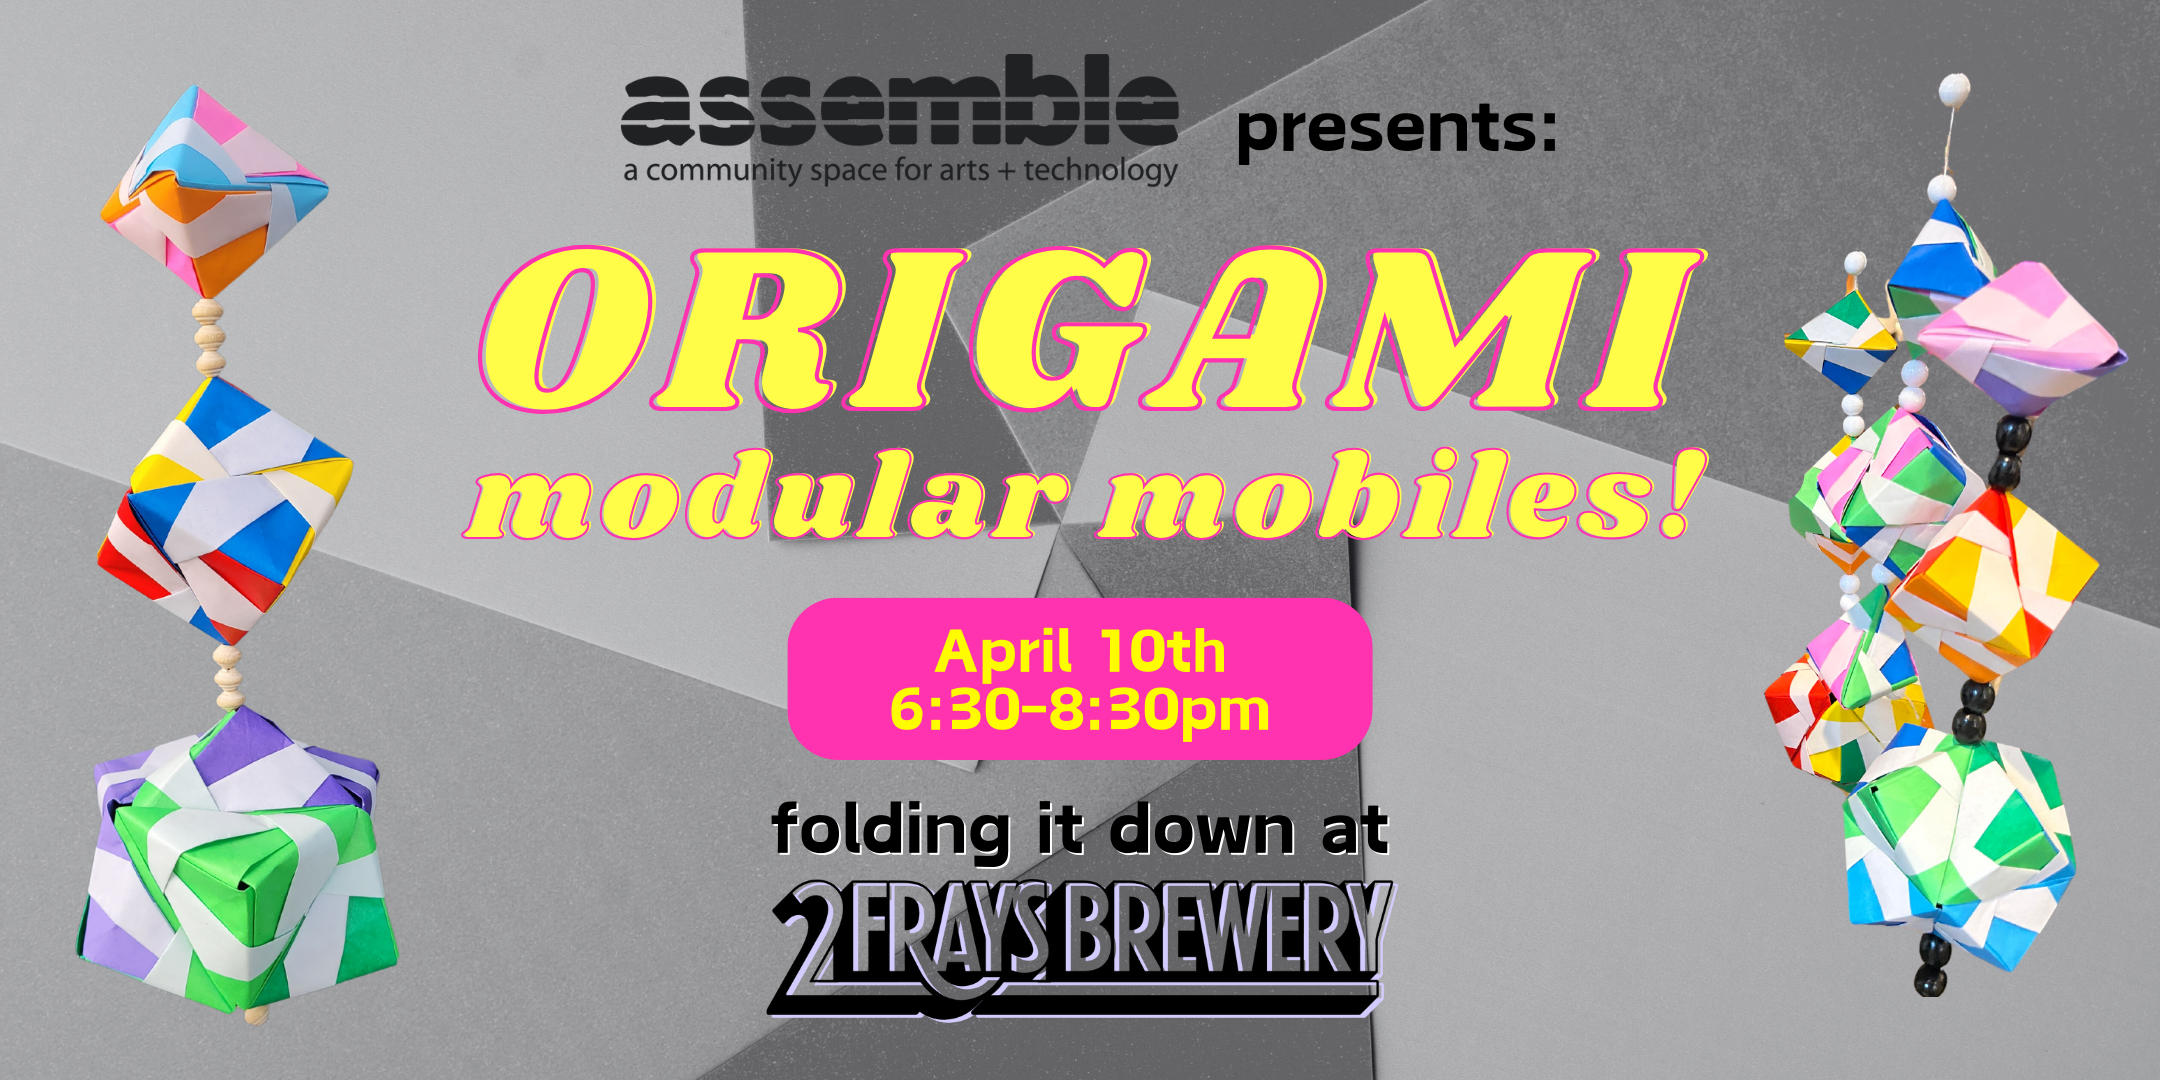 graphic with assemble logo, presents Origami modular mobiles april 10, 6:30-8:30pm folding down at 2fraysbrewery logo. Photos of origami mobiles on sides of graphic.